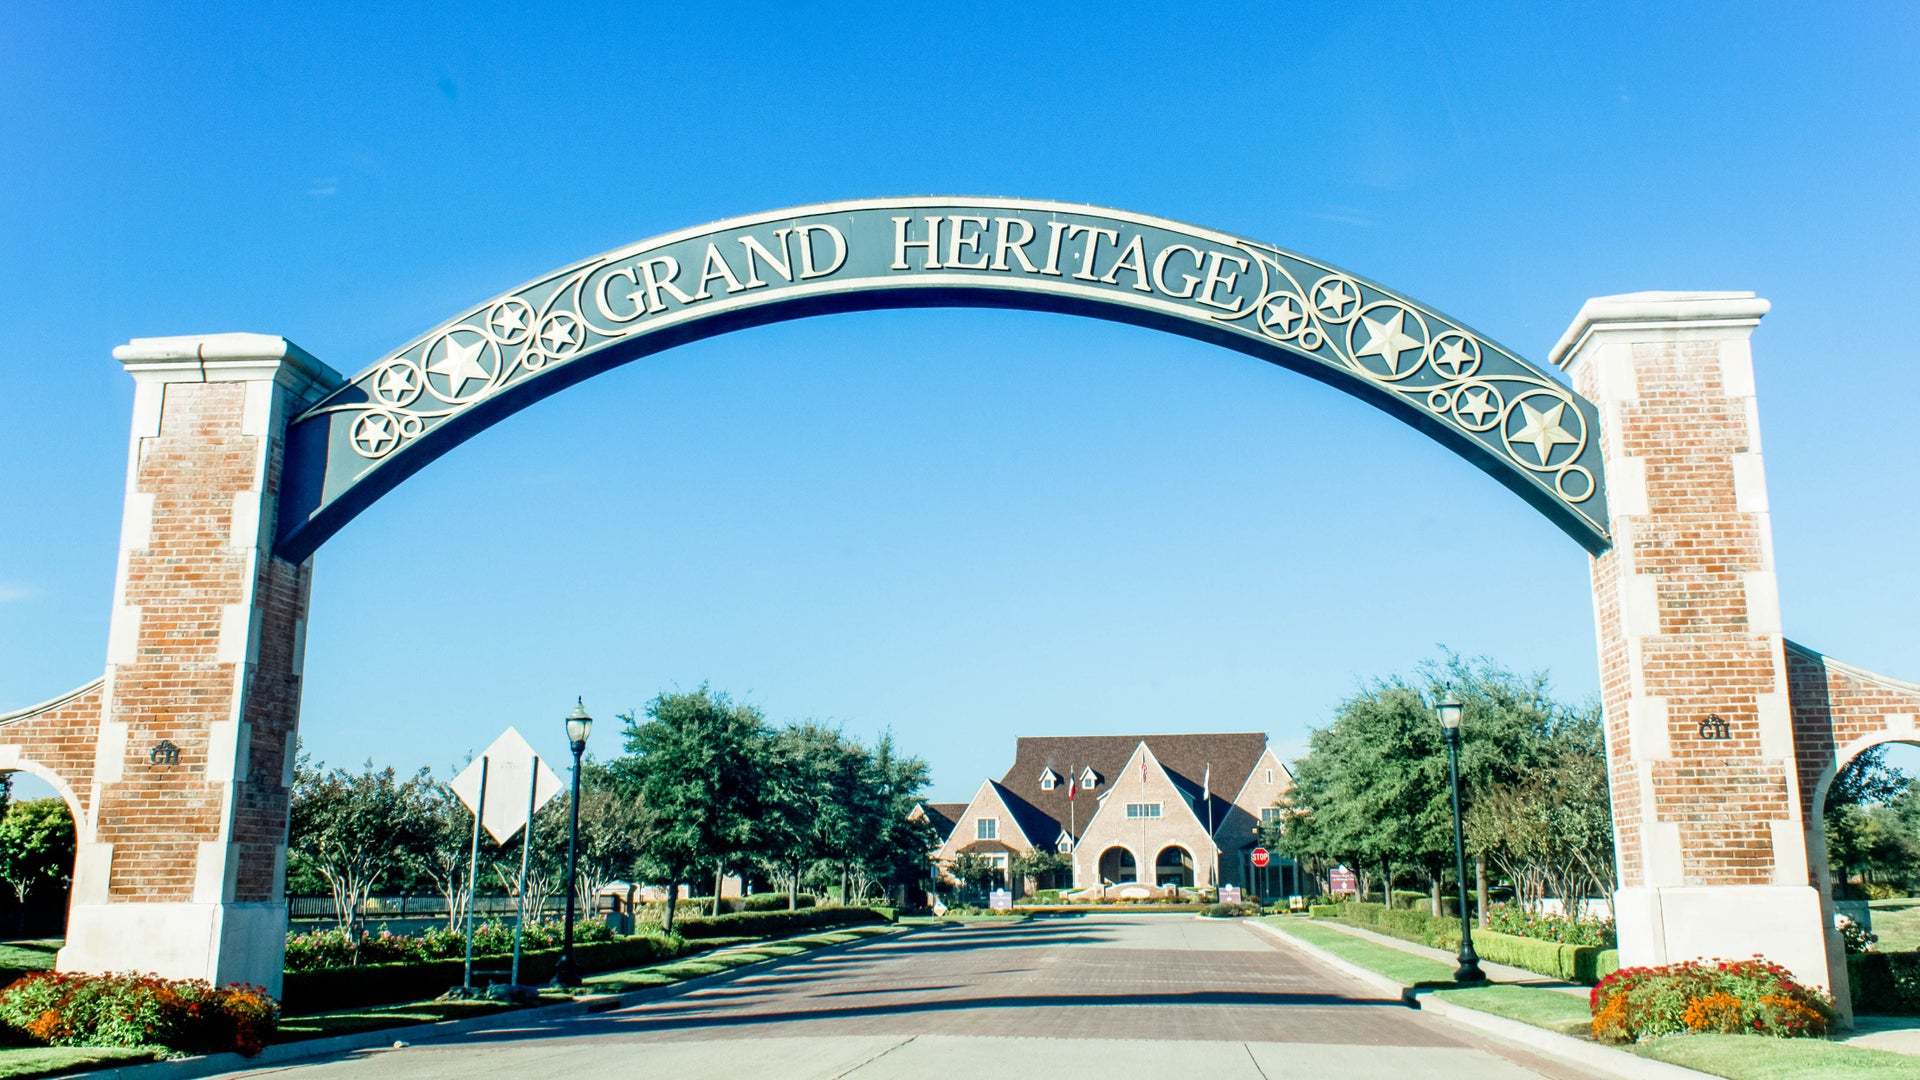 Sign:Grand Heritage Sign